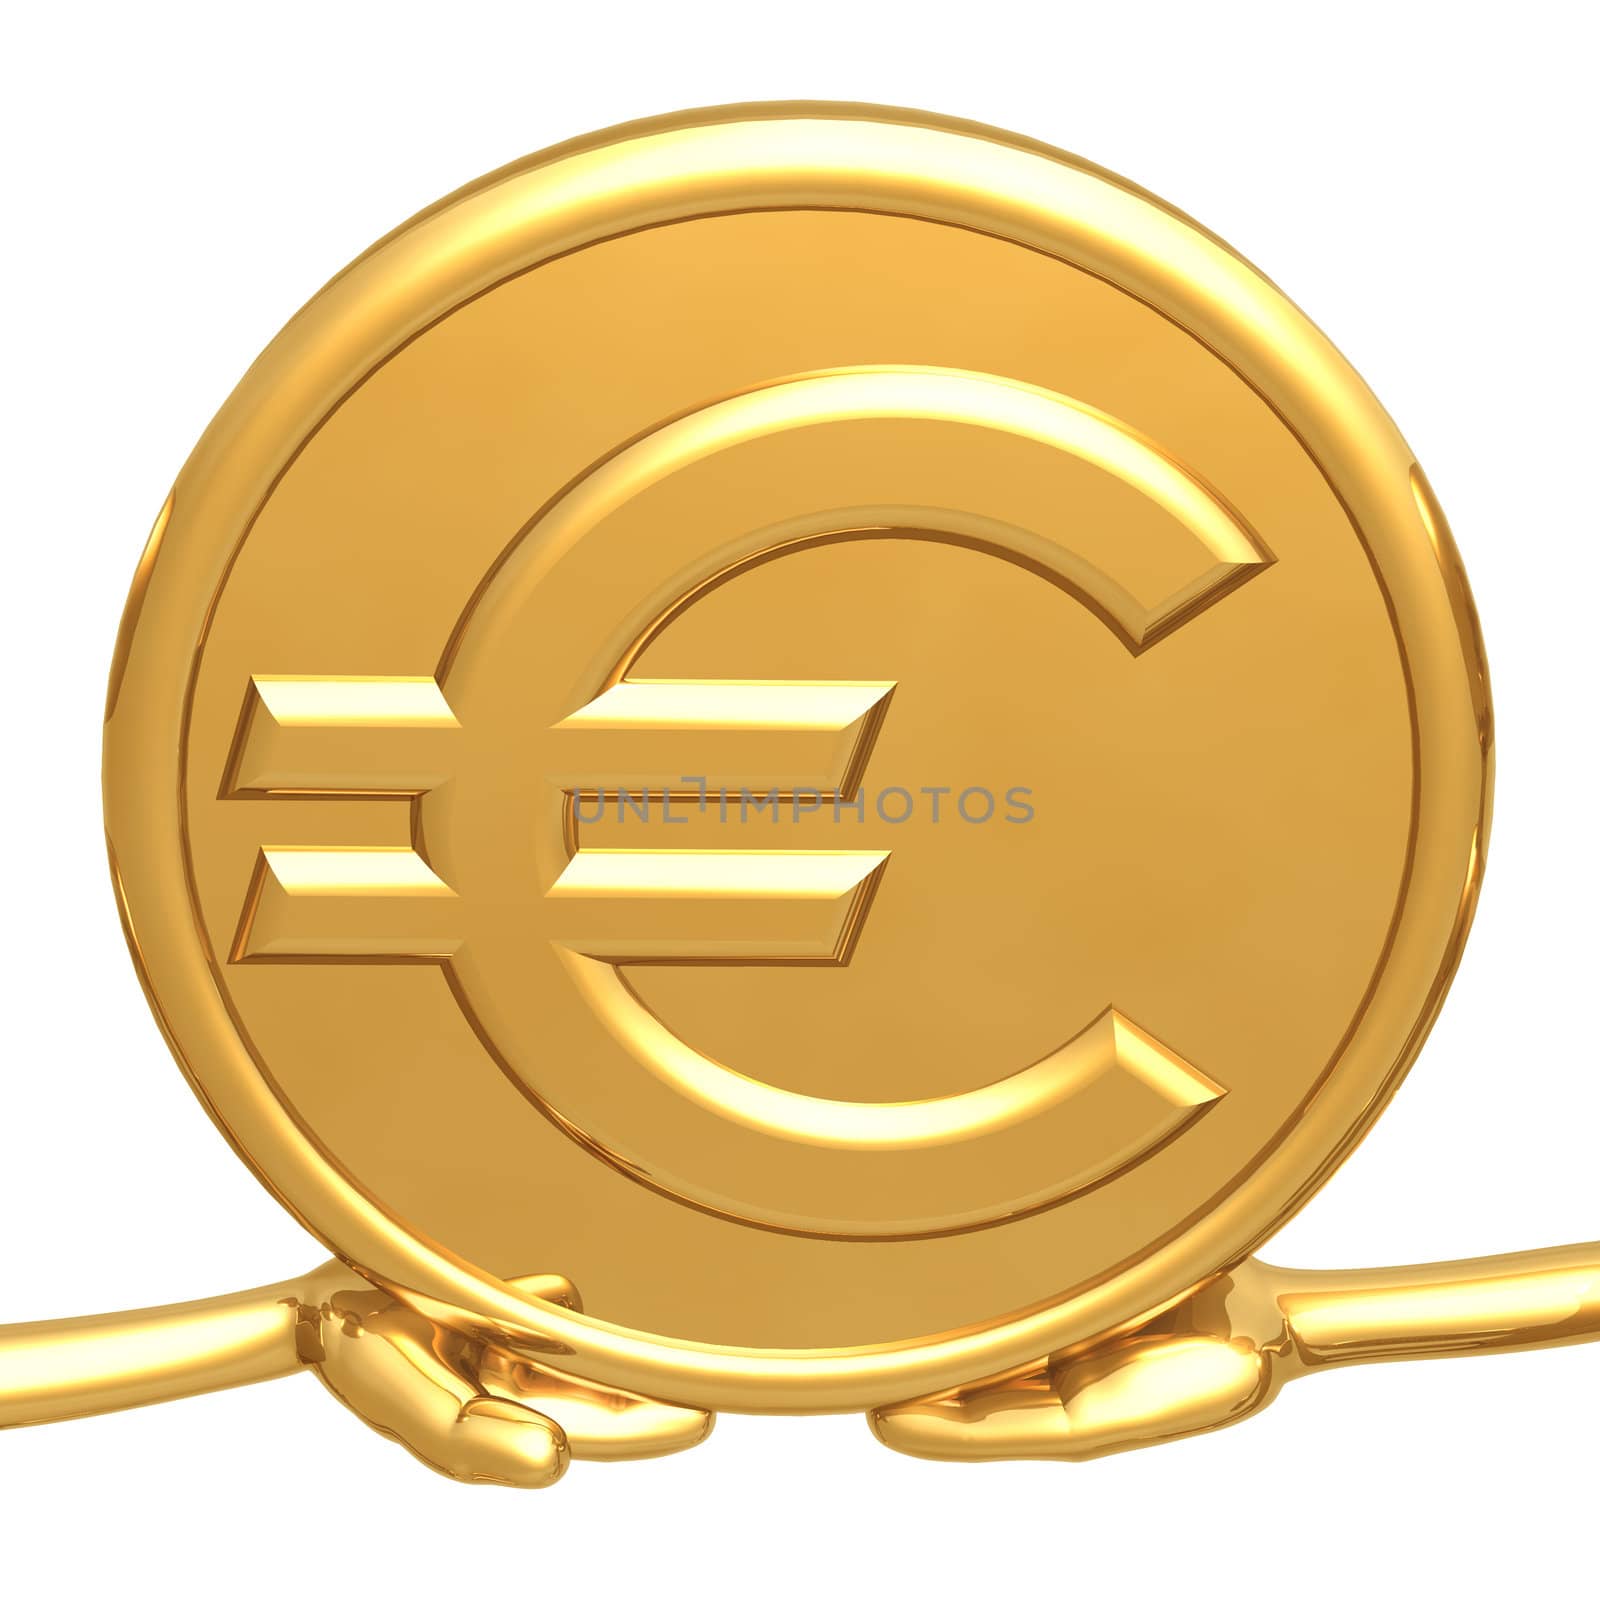 Holding Gold Euro Coin by LuMaxArt